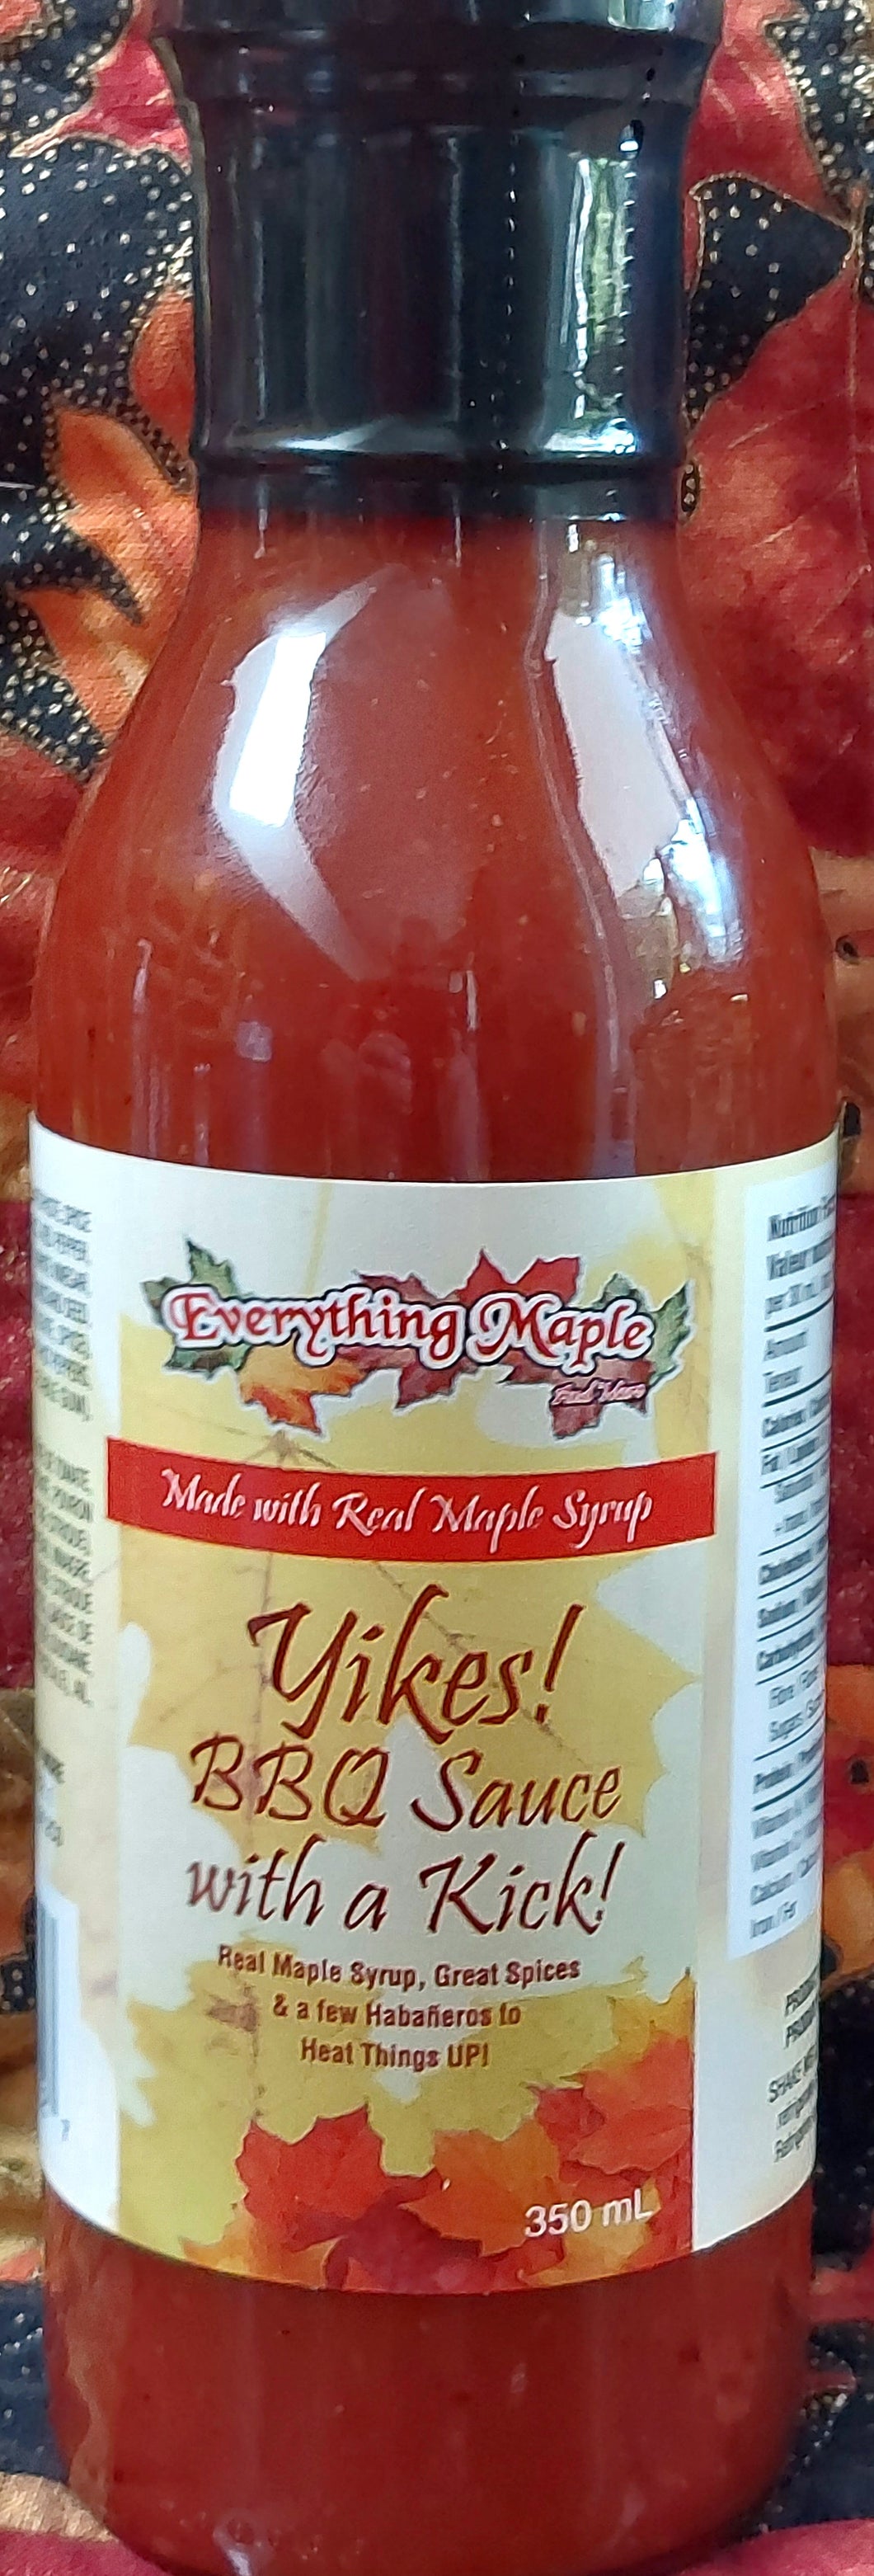 Yikes! Maple Barbeque Sauce with a Kick!